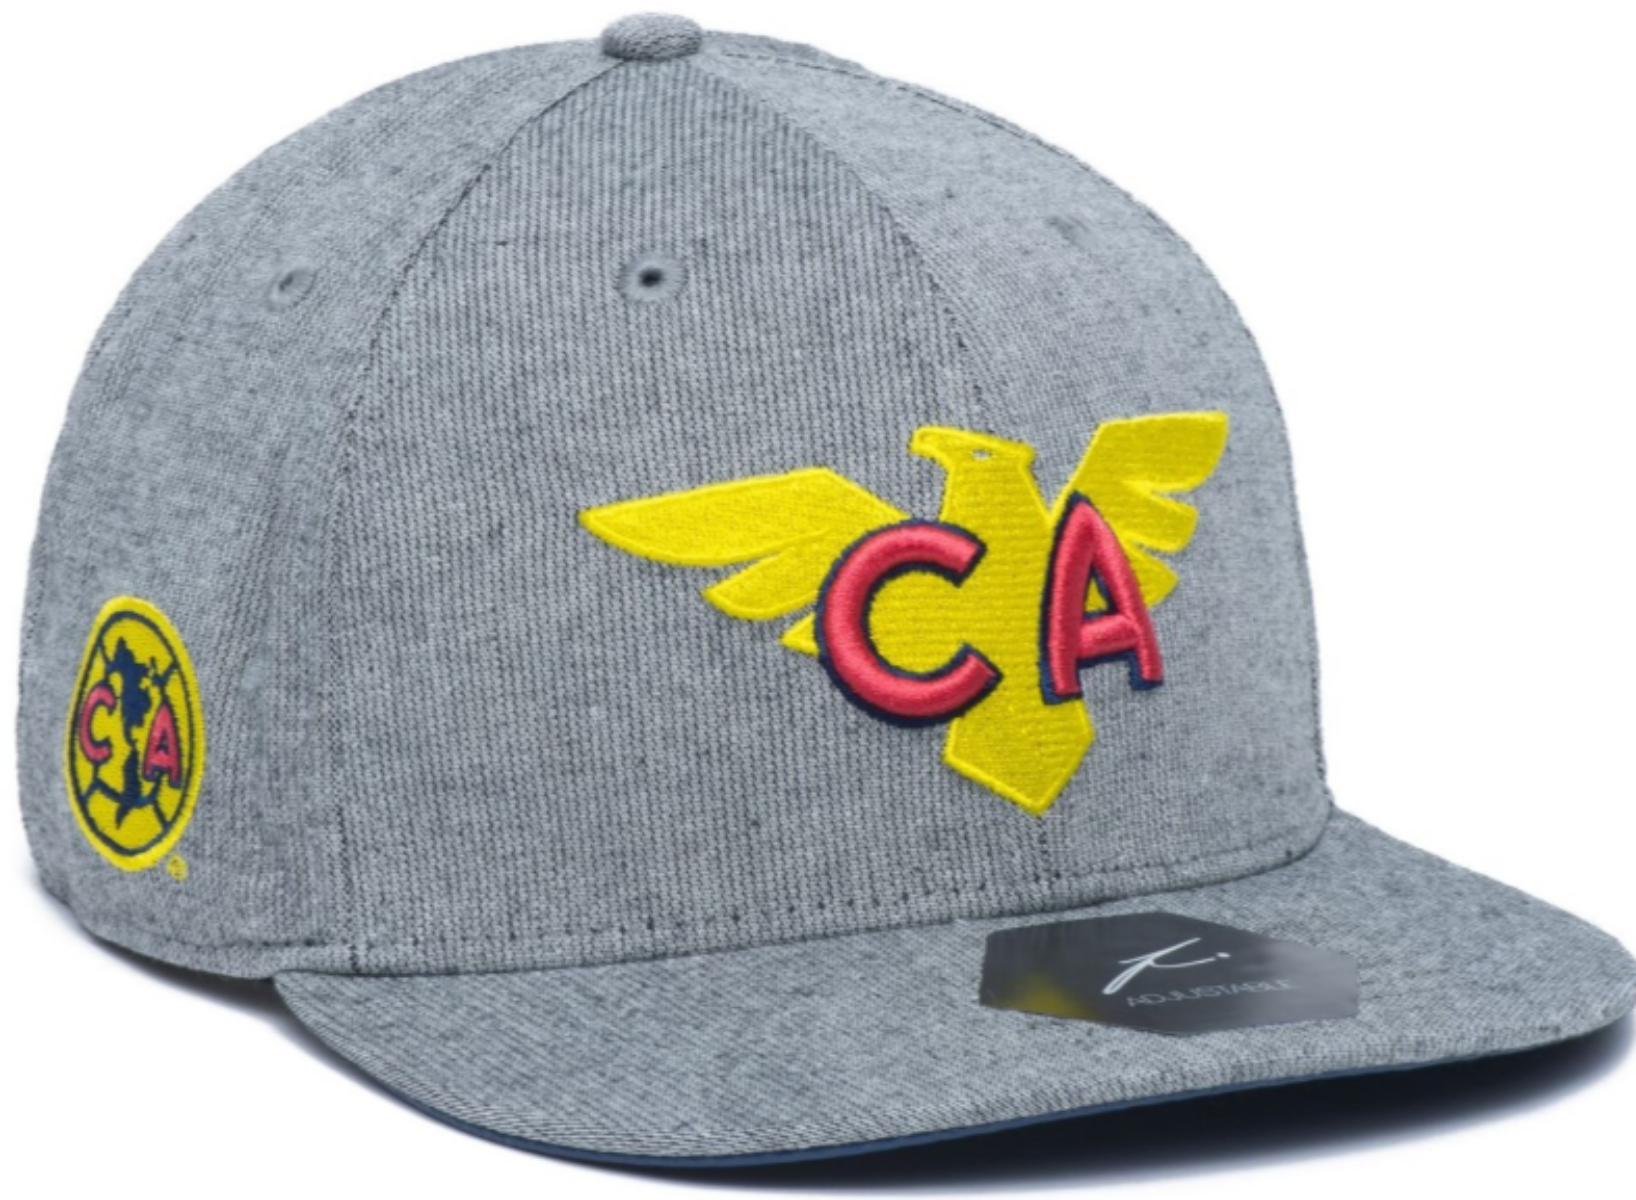 FI COLLECTION CLUB AMERICA STACK SNAPBACK HAT